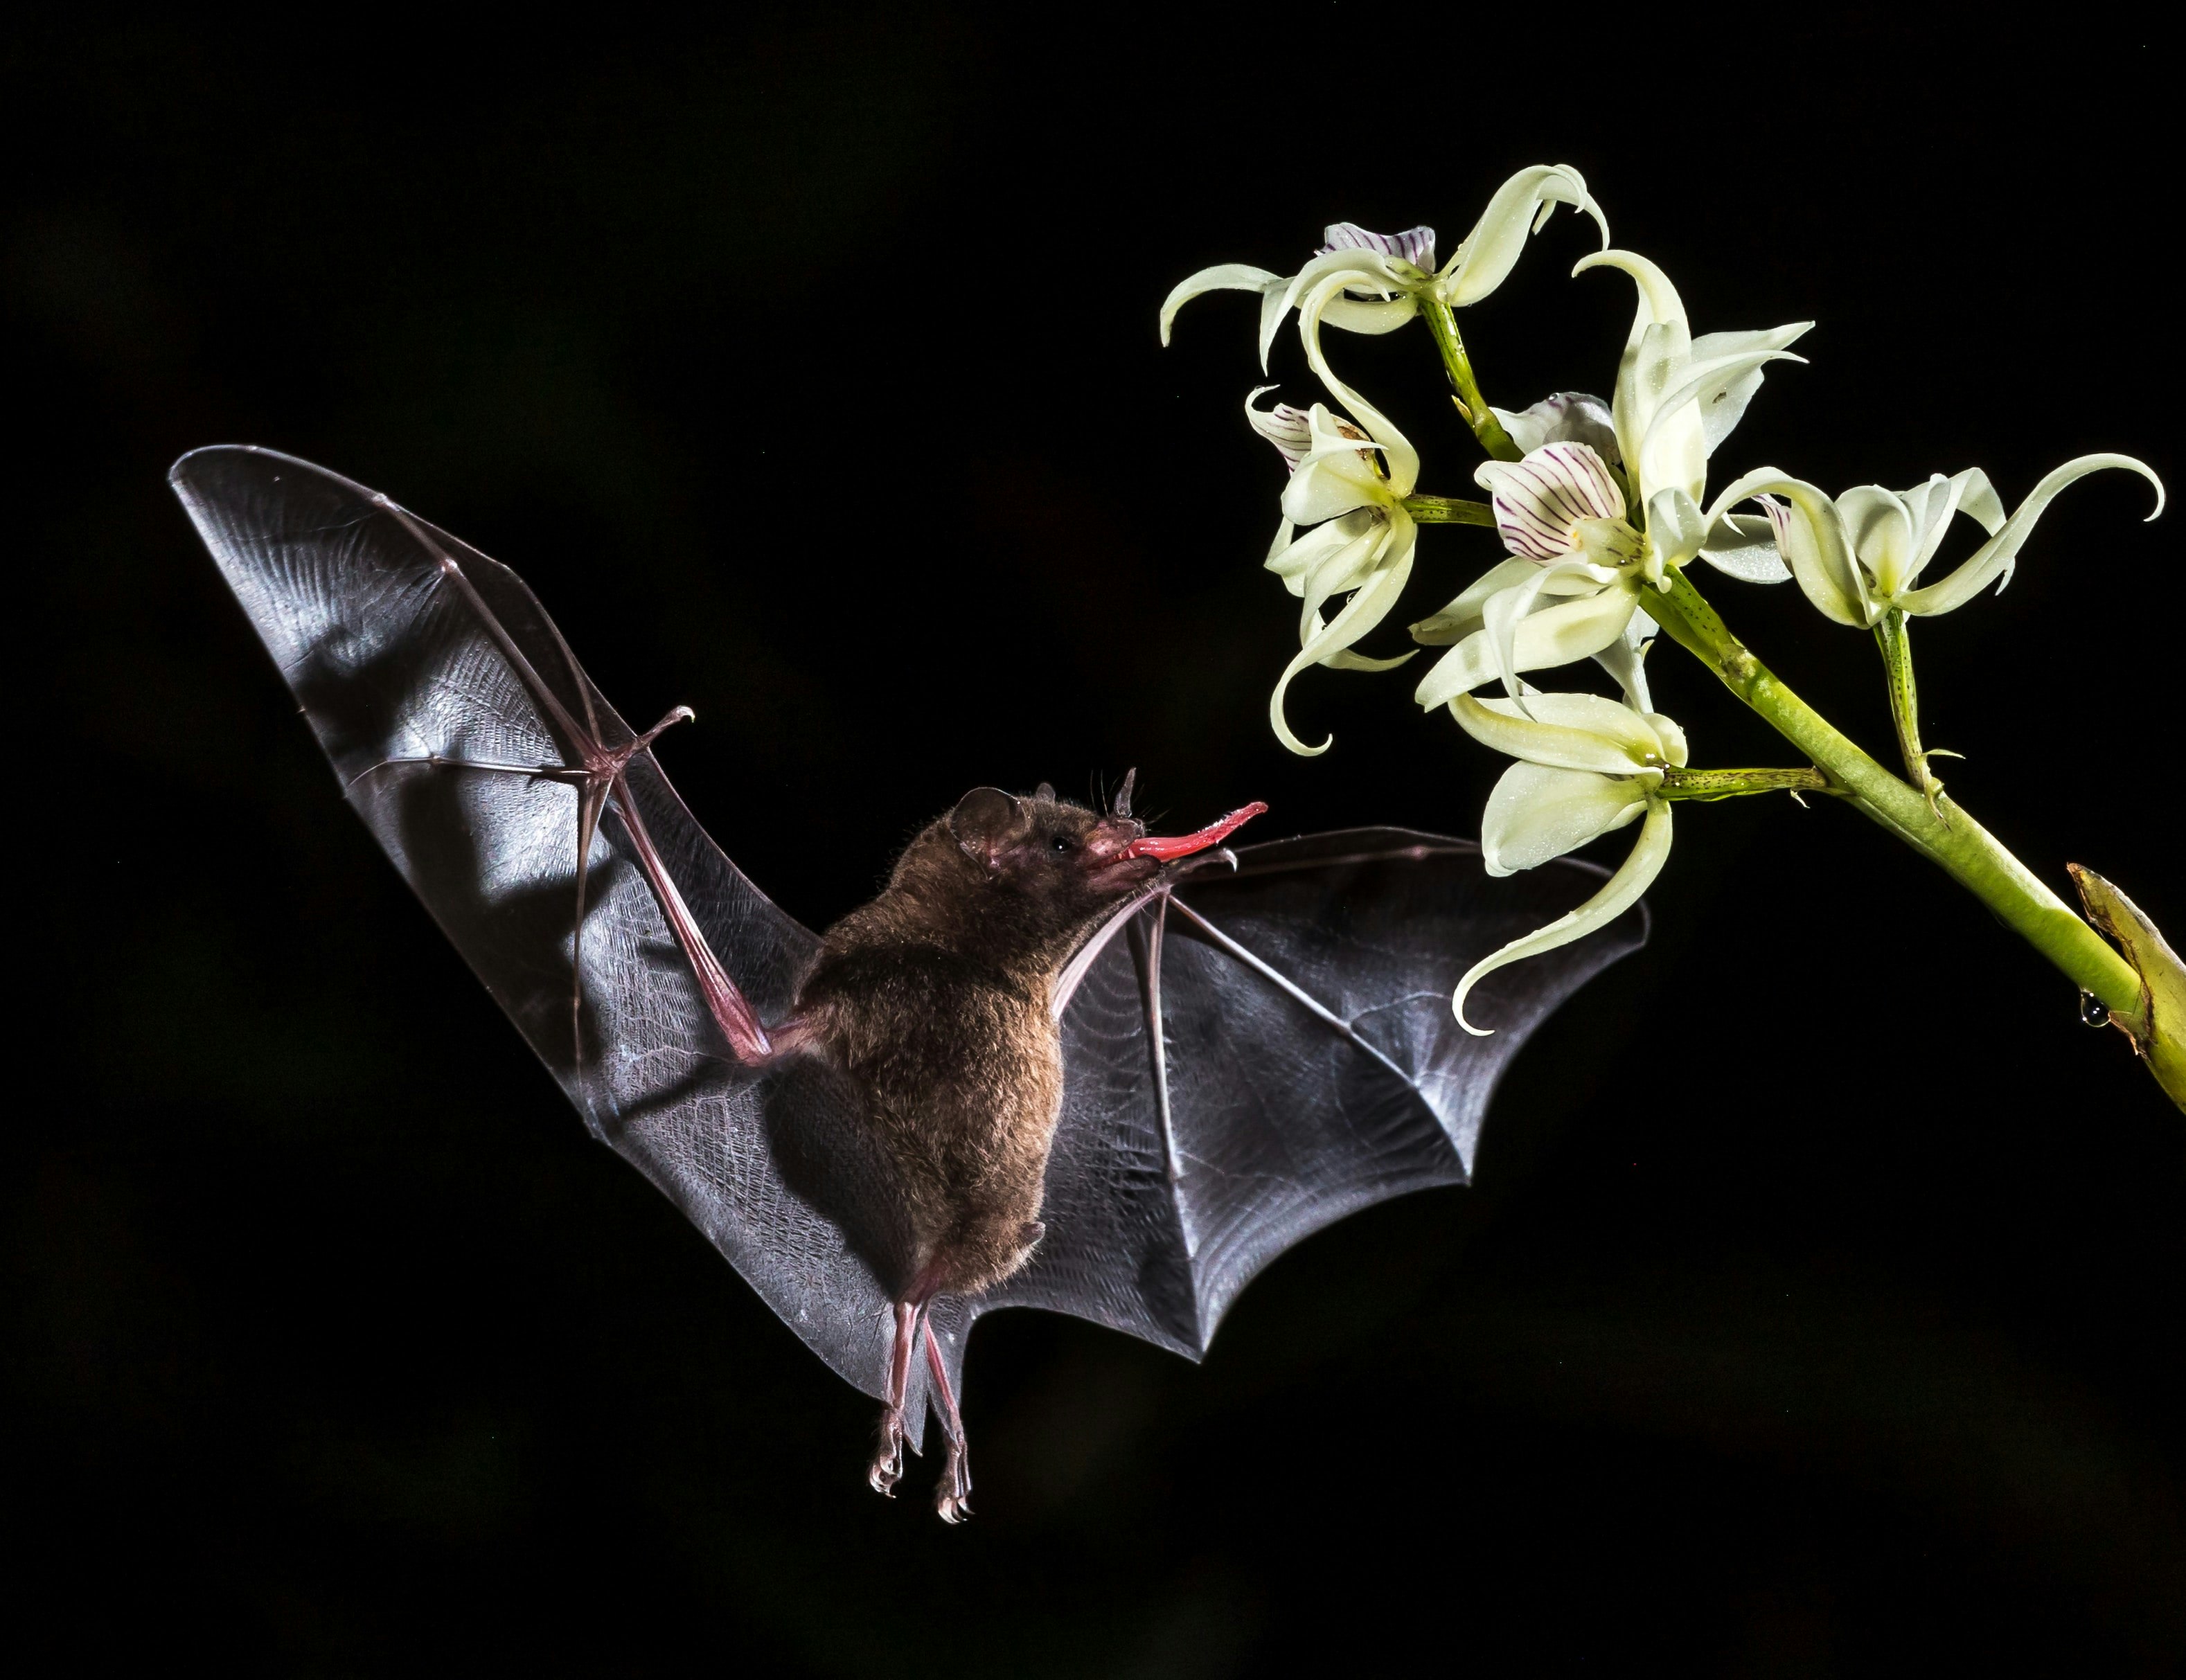 A bat flying close to a flower.